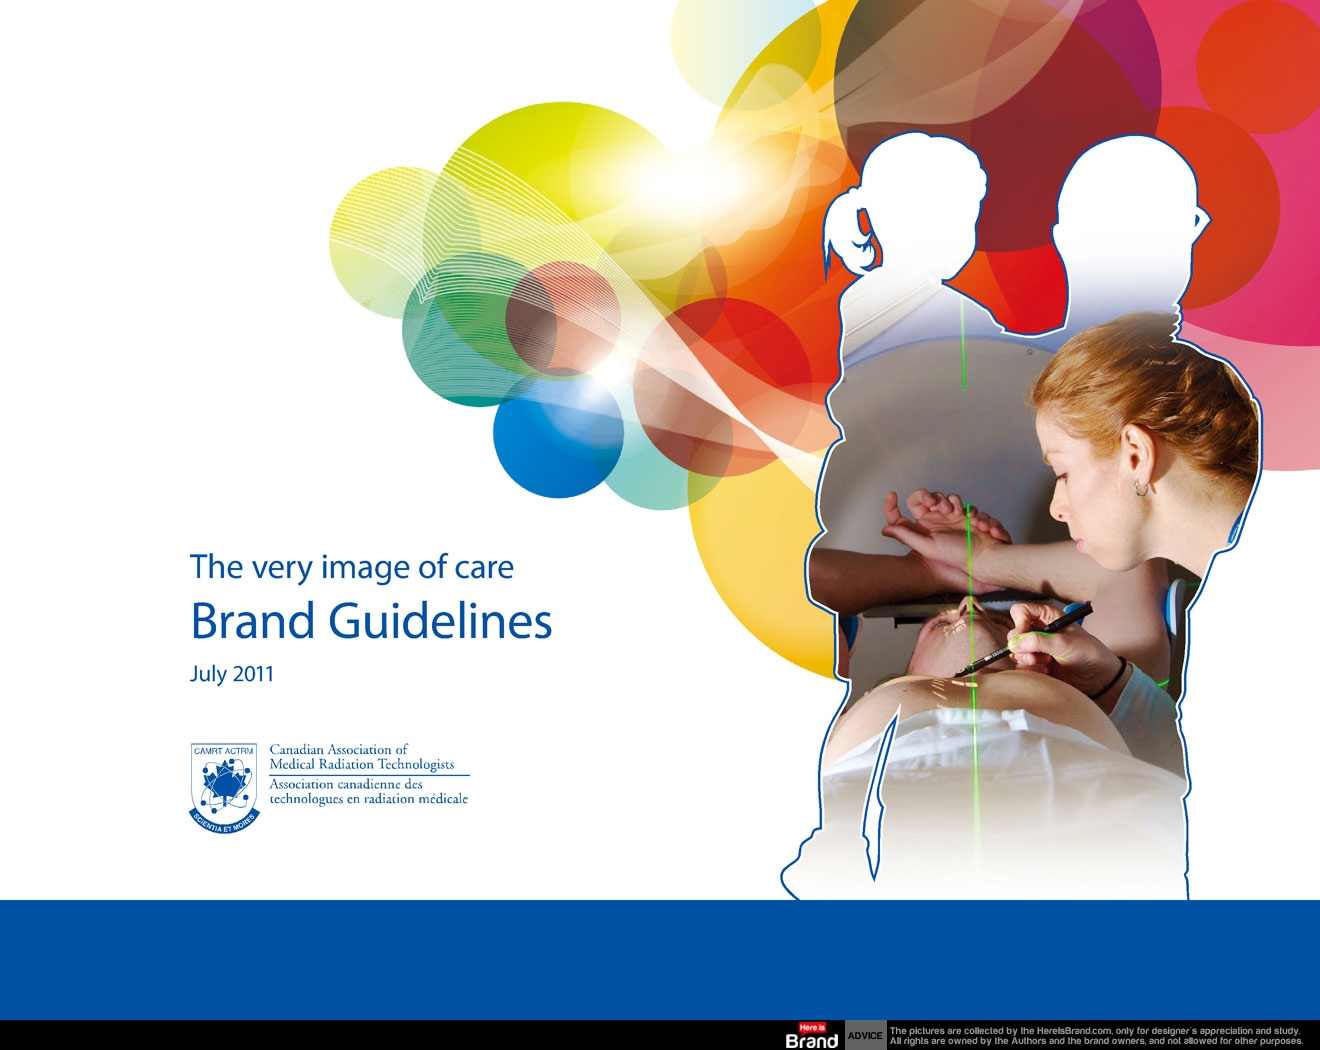 The Very Image of Care brand guidelines